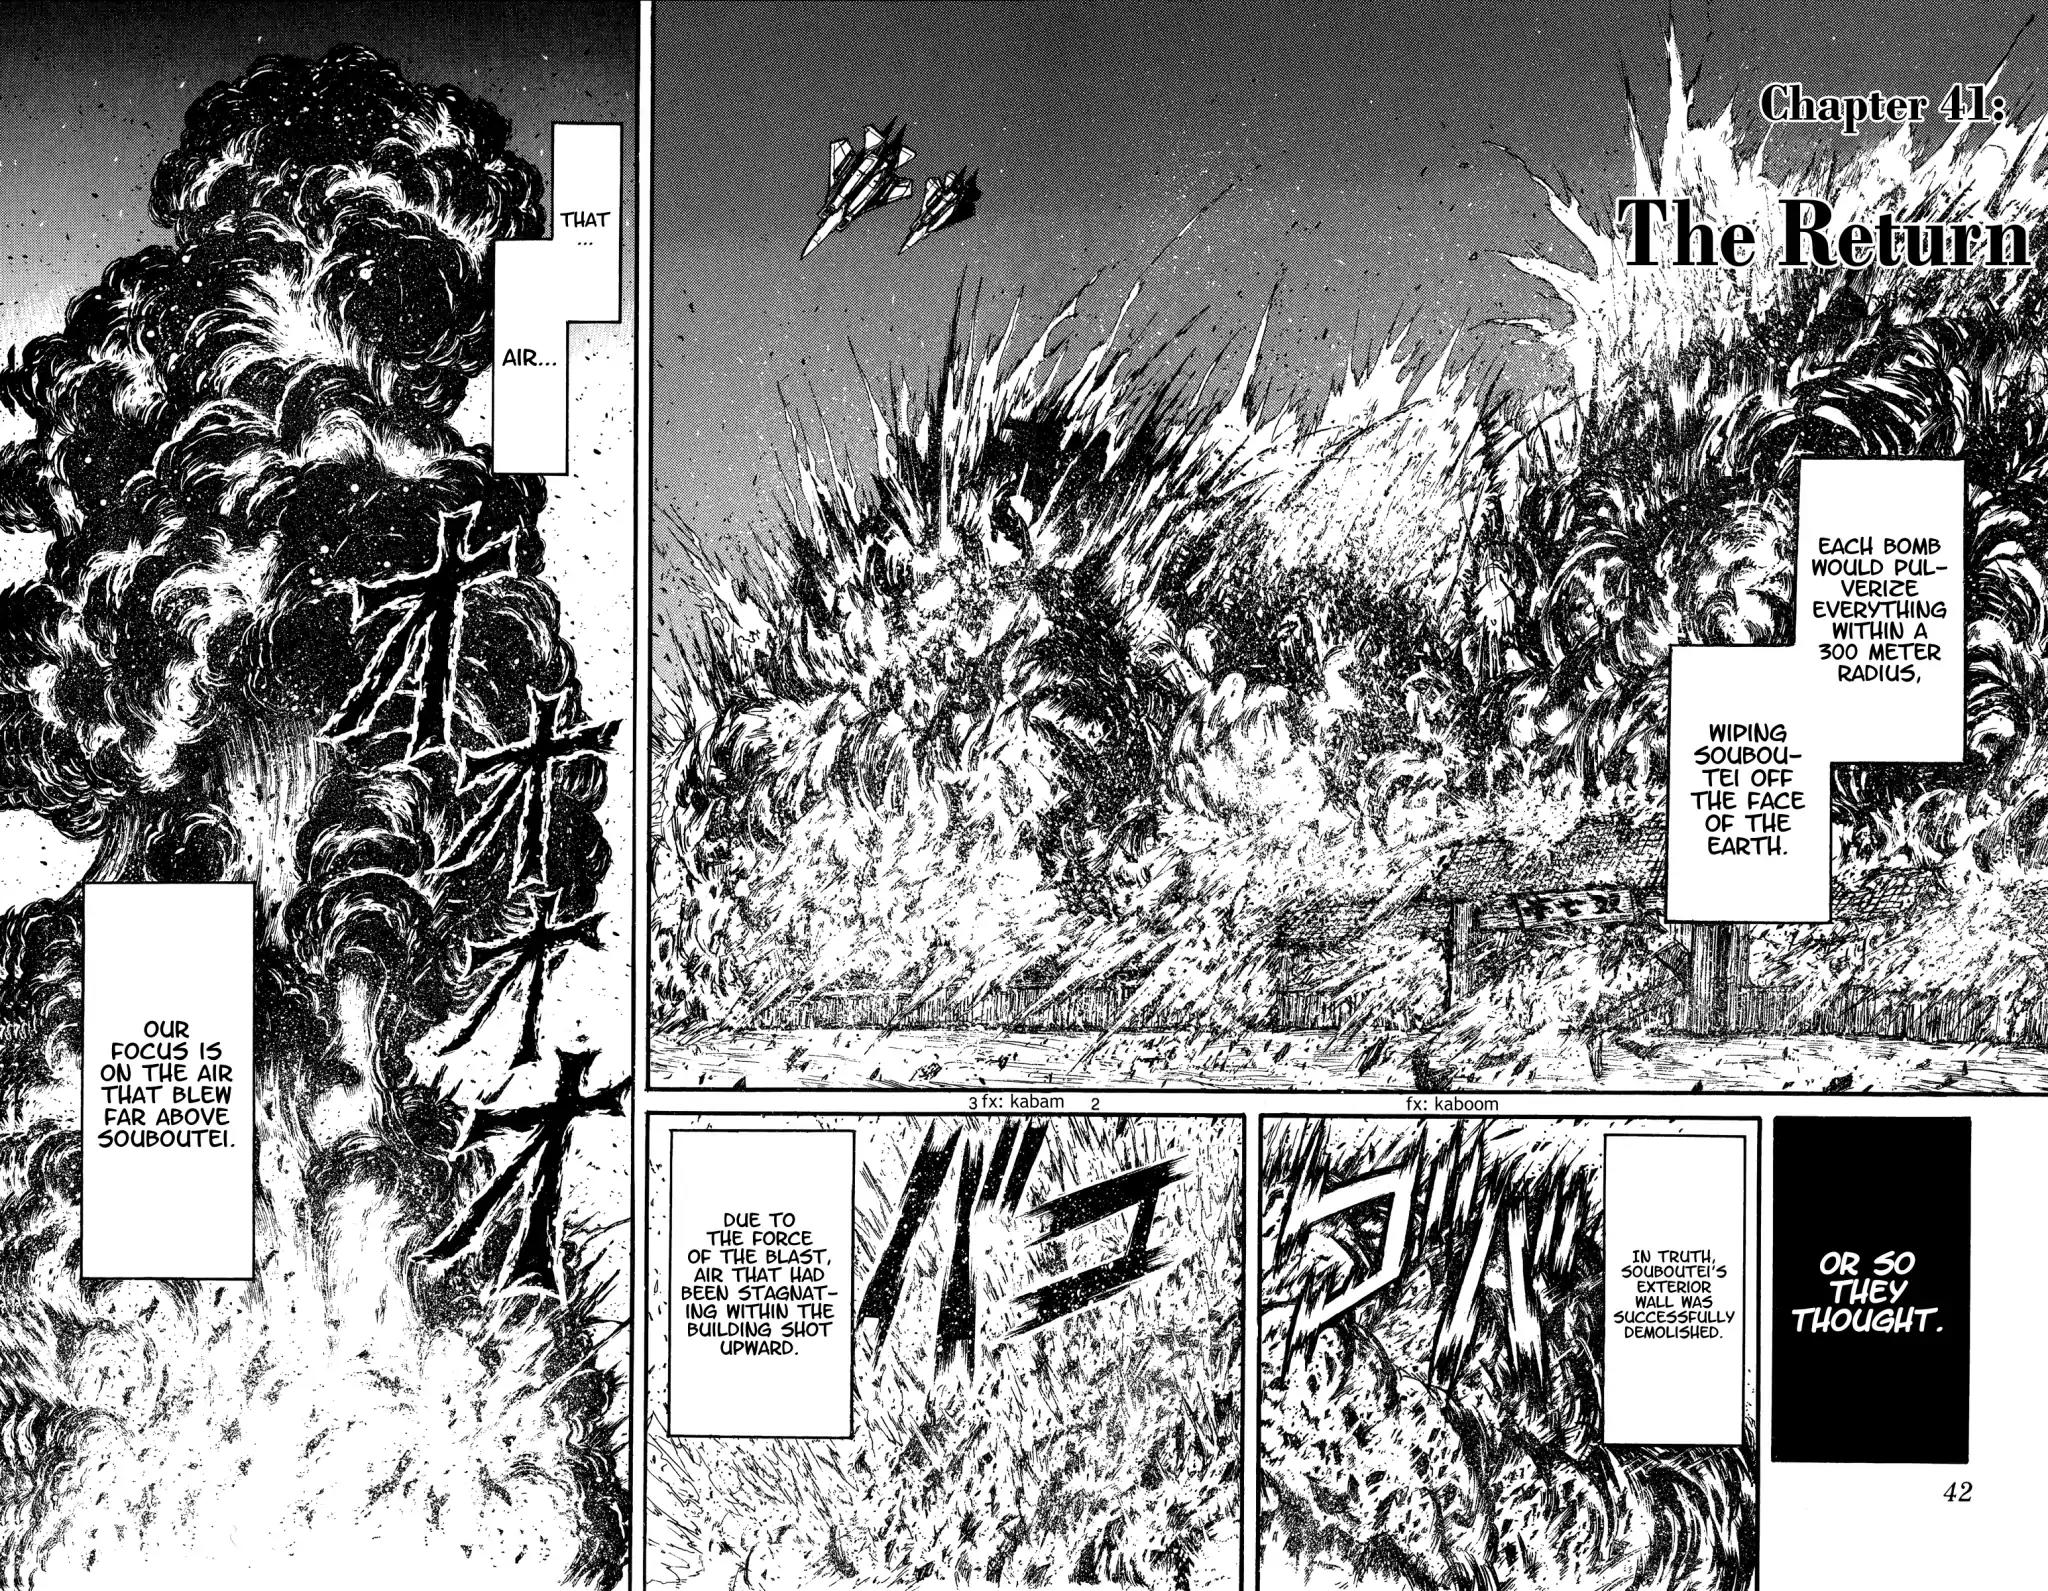 Souboutei Must Be Destroyed Chapter 41: